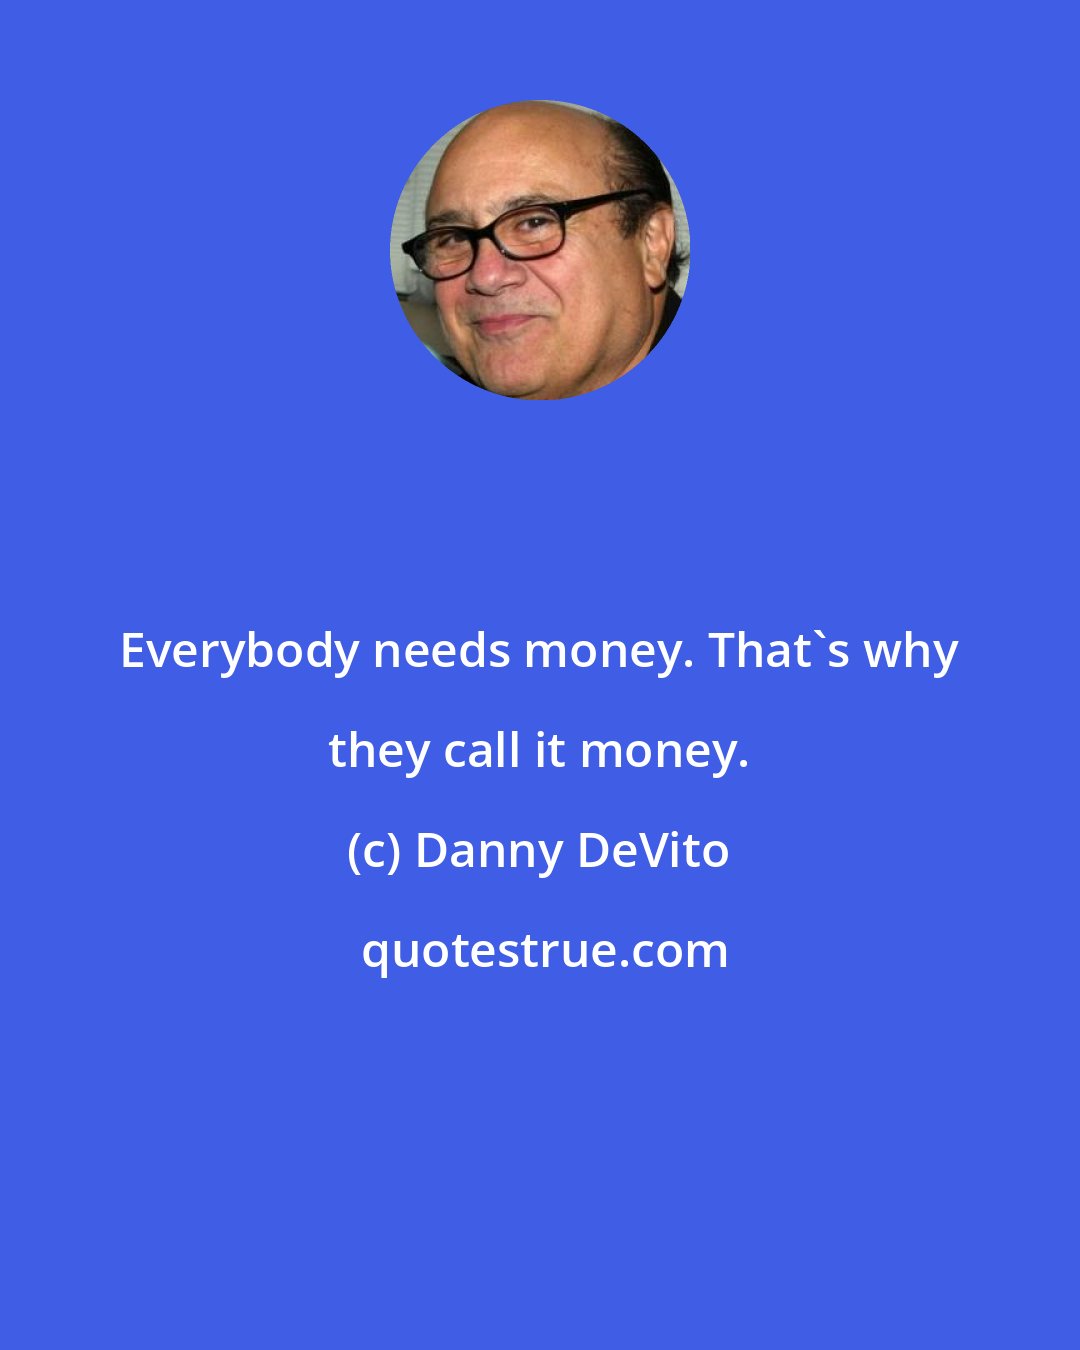 Danny DeVito: Everybody needs money. That's why they call it money.